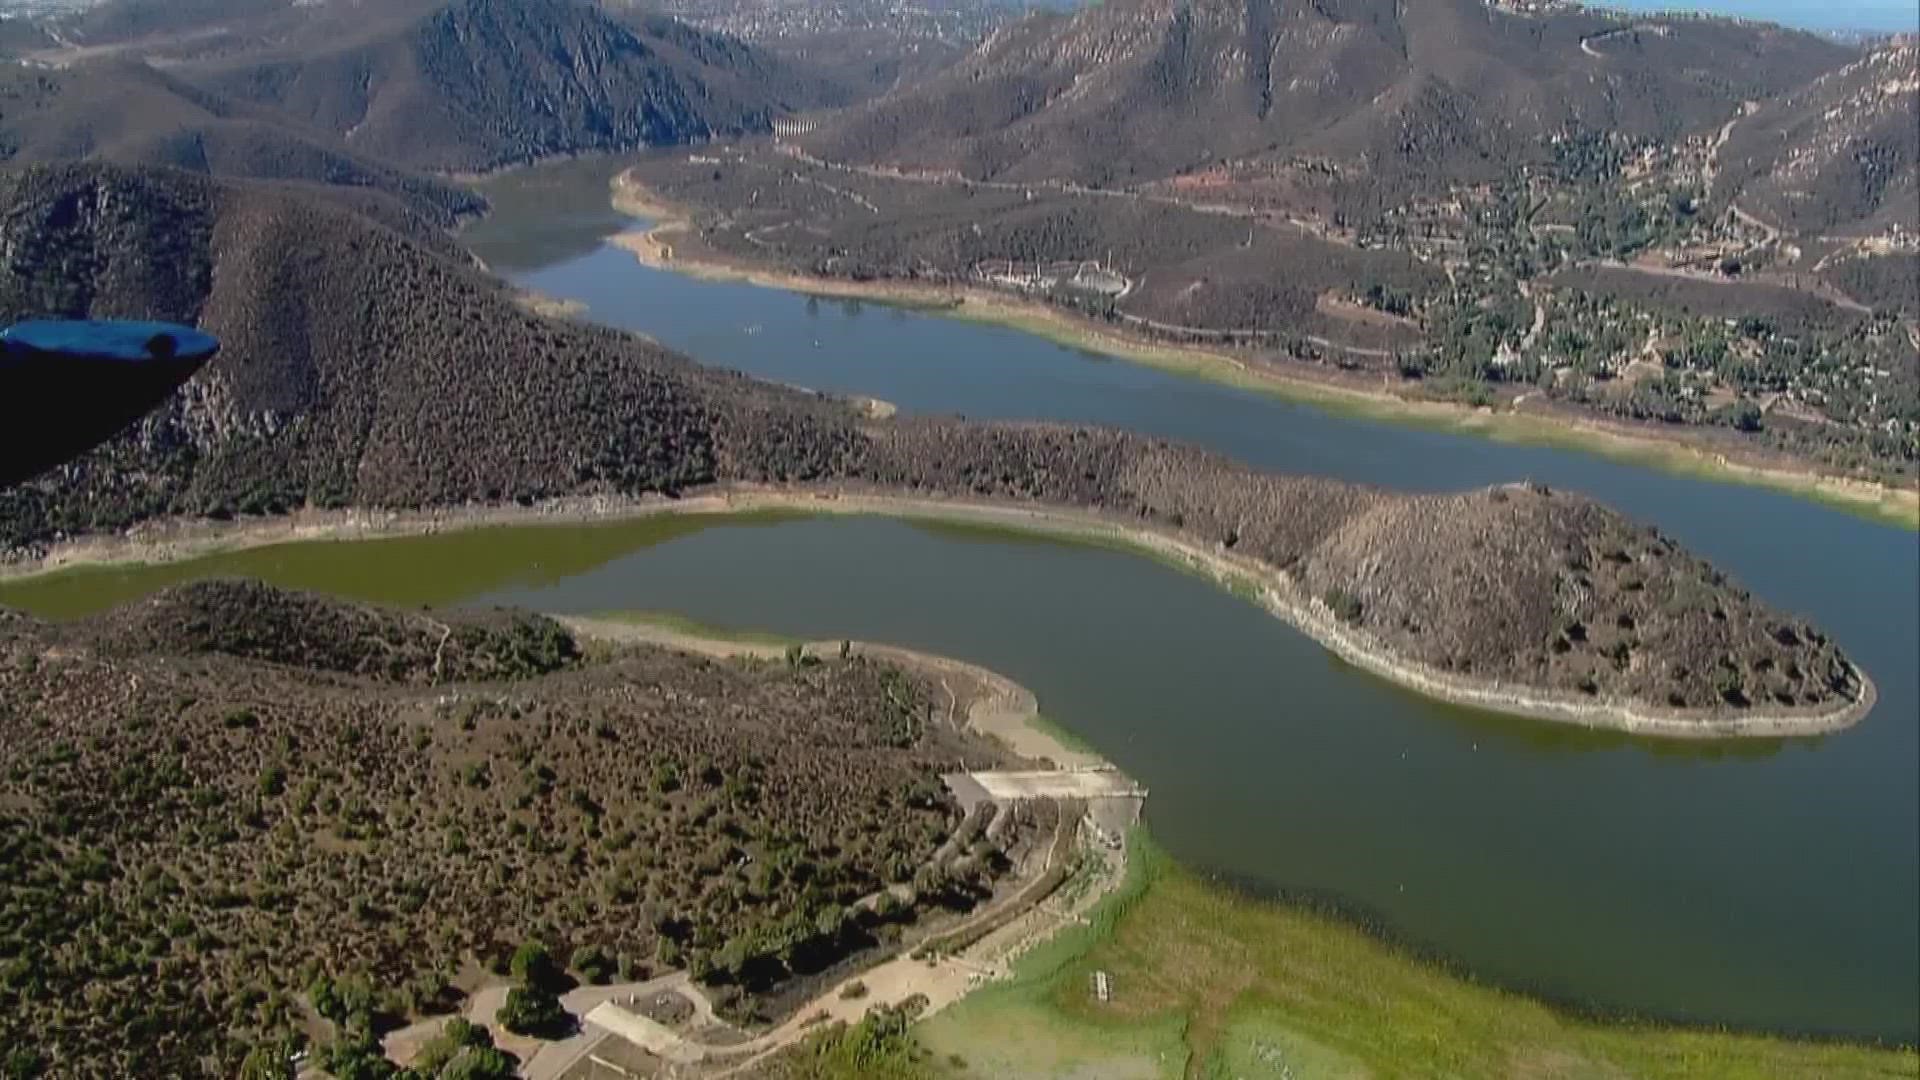 An inspection of Lake Hodges Dam a few months ago found damage and the process of lowering the water level to make repairs has started. More: lakes@sandiego.gov